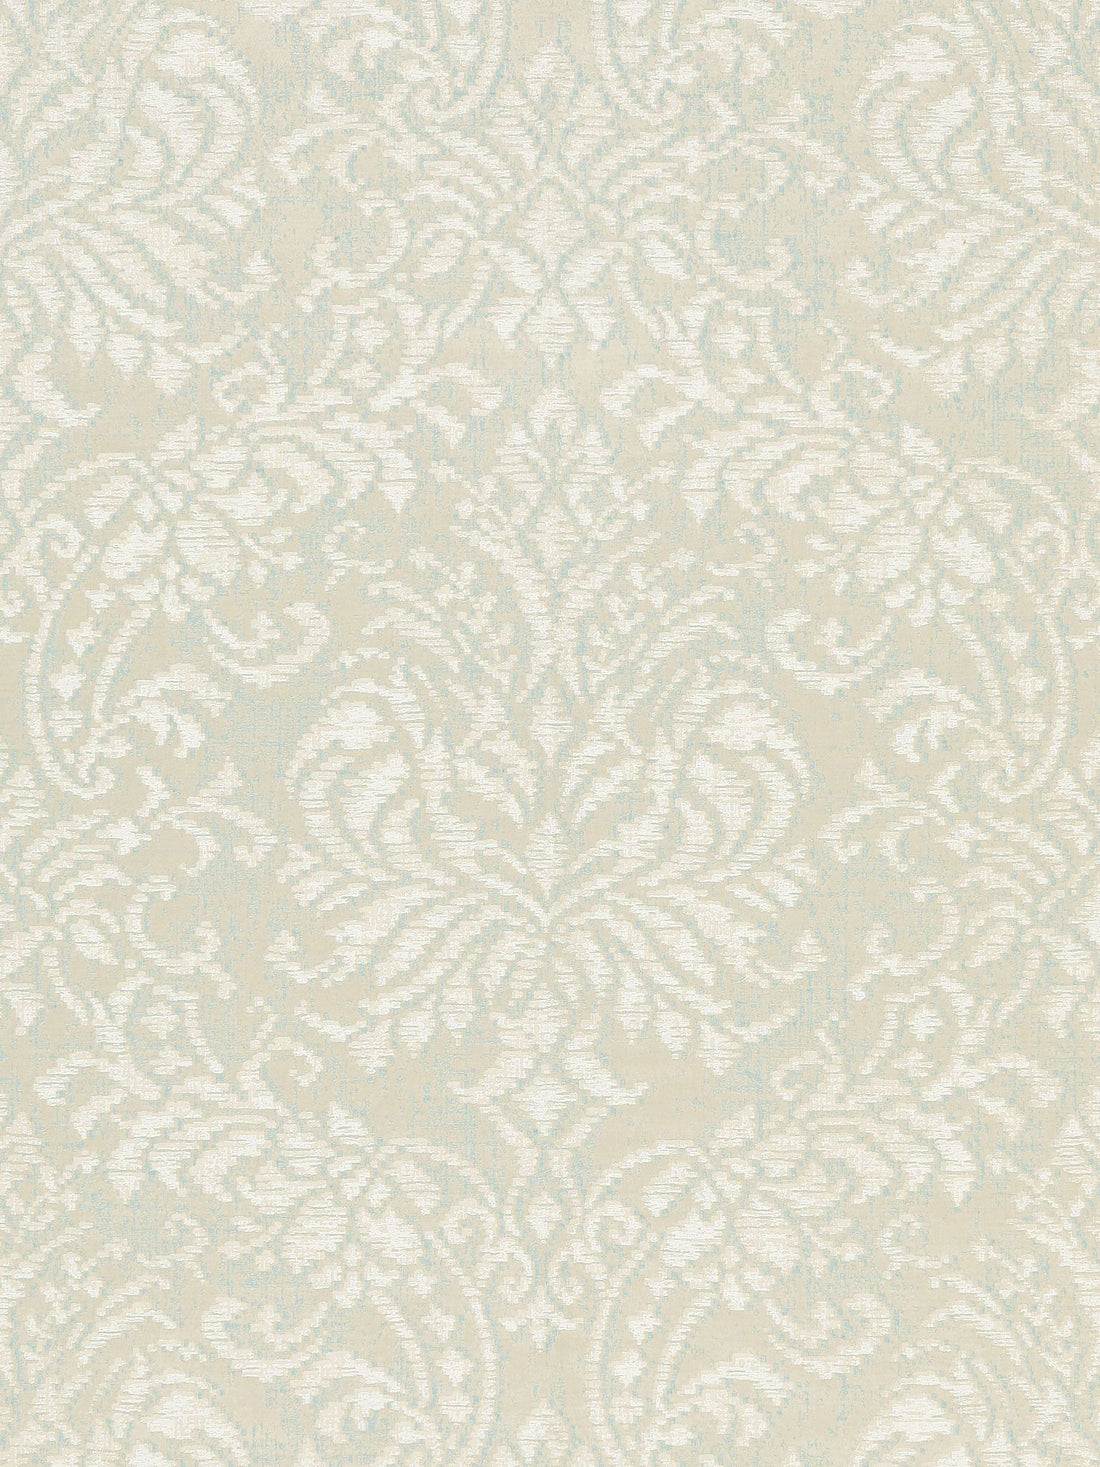 Camille Damask fabric in latte color - pattern number SC 000127226 - by Scalamandre in the Scalamandre Fabrics Book 1 collection